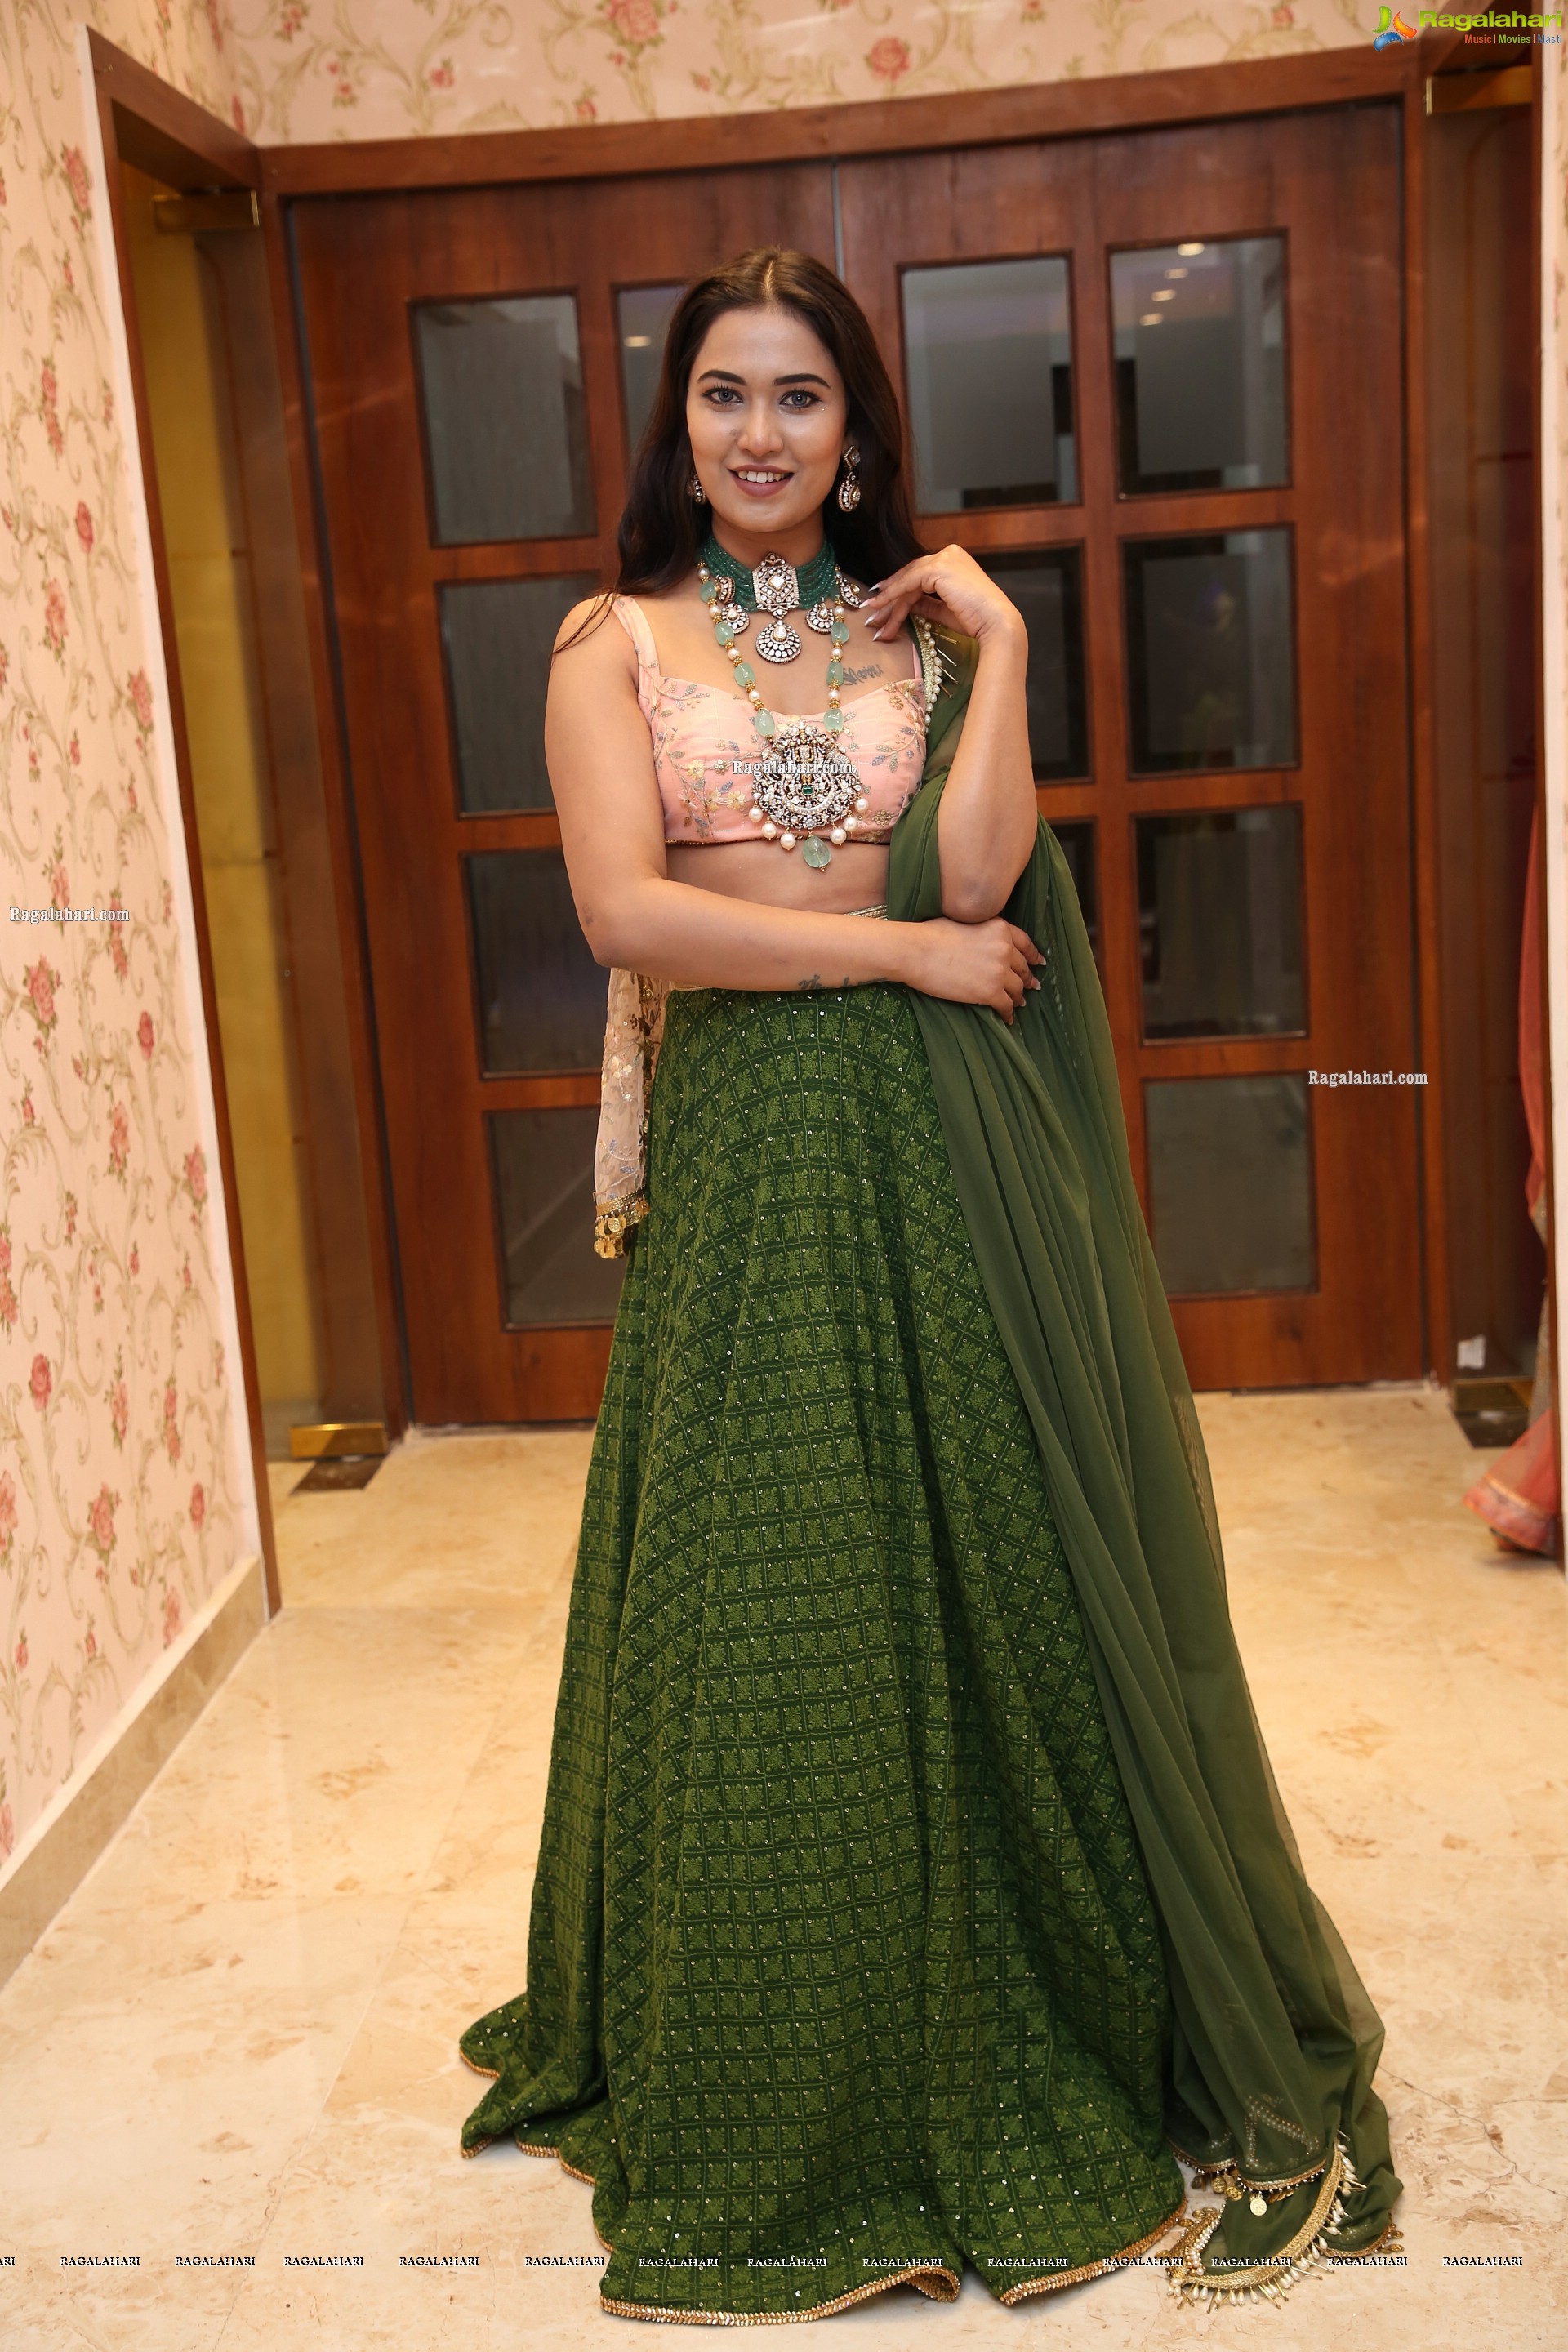 Honey Reddy Poses With Gold Jewellery, HD Photo Gallery